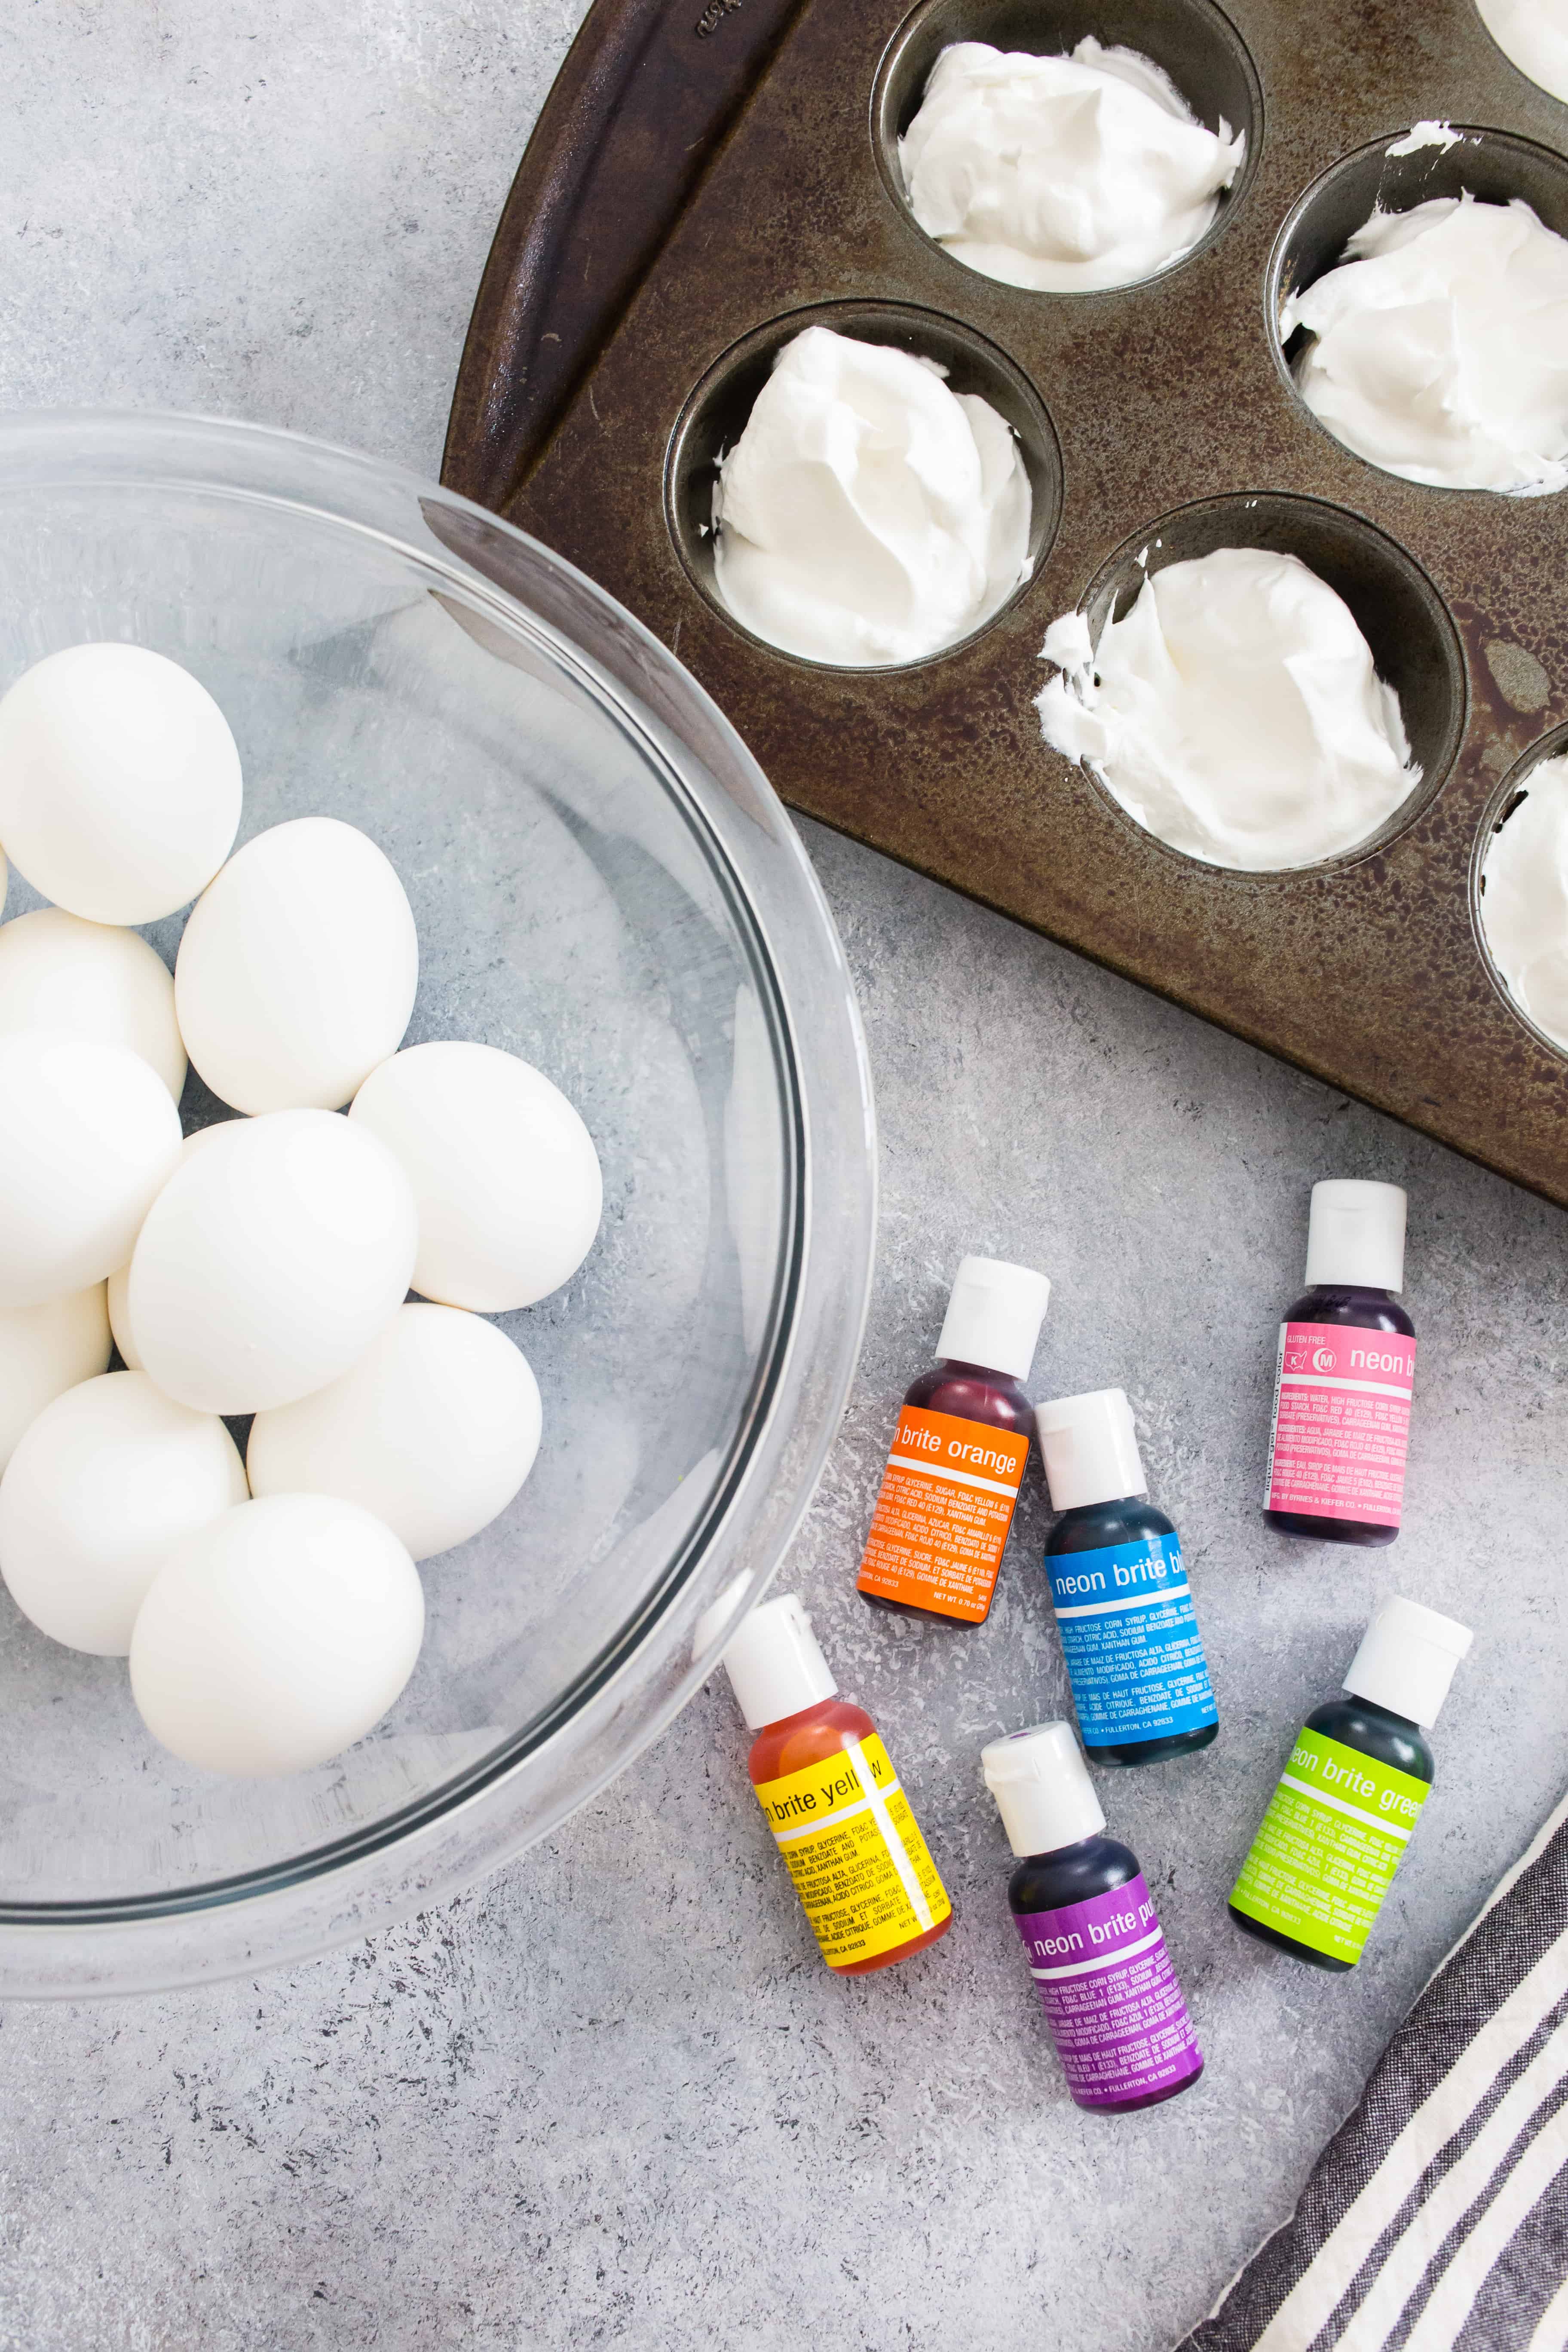 Whipped Cream Dyed Eggs couldn't be easier. With only a few ingredients you'll have the prefect family project for Easter!